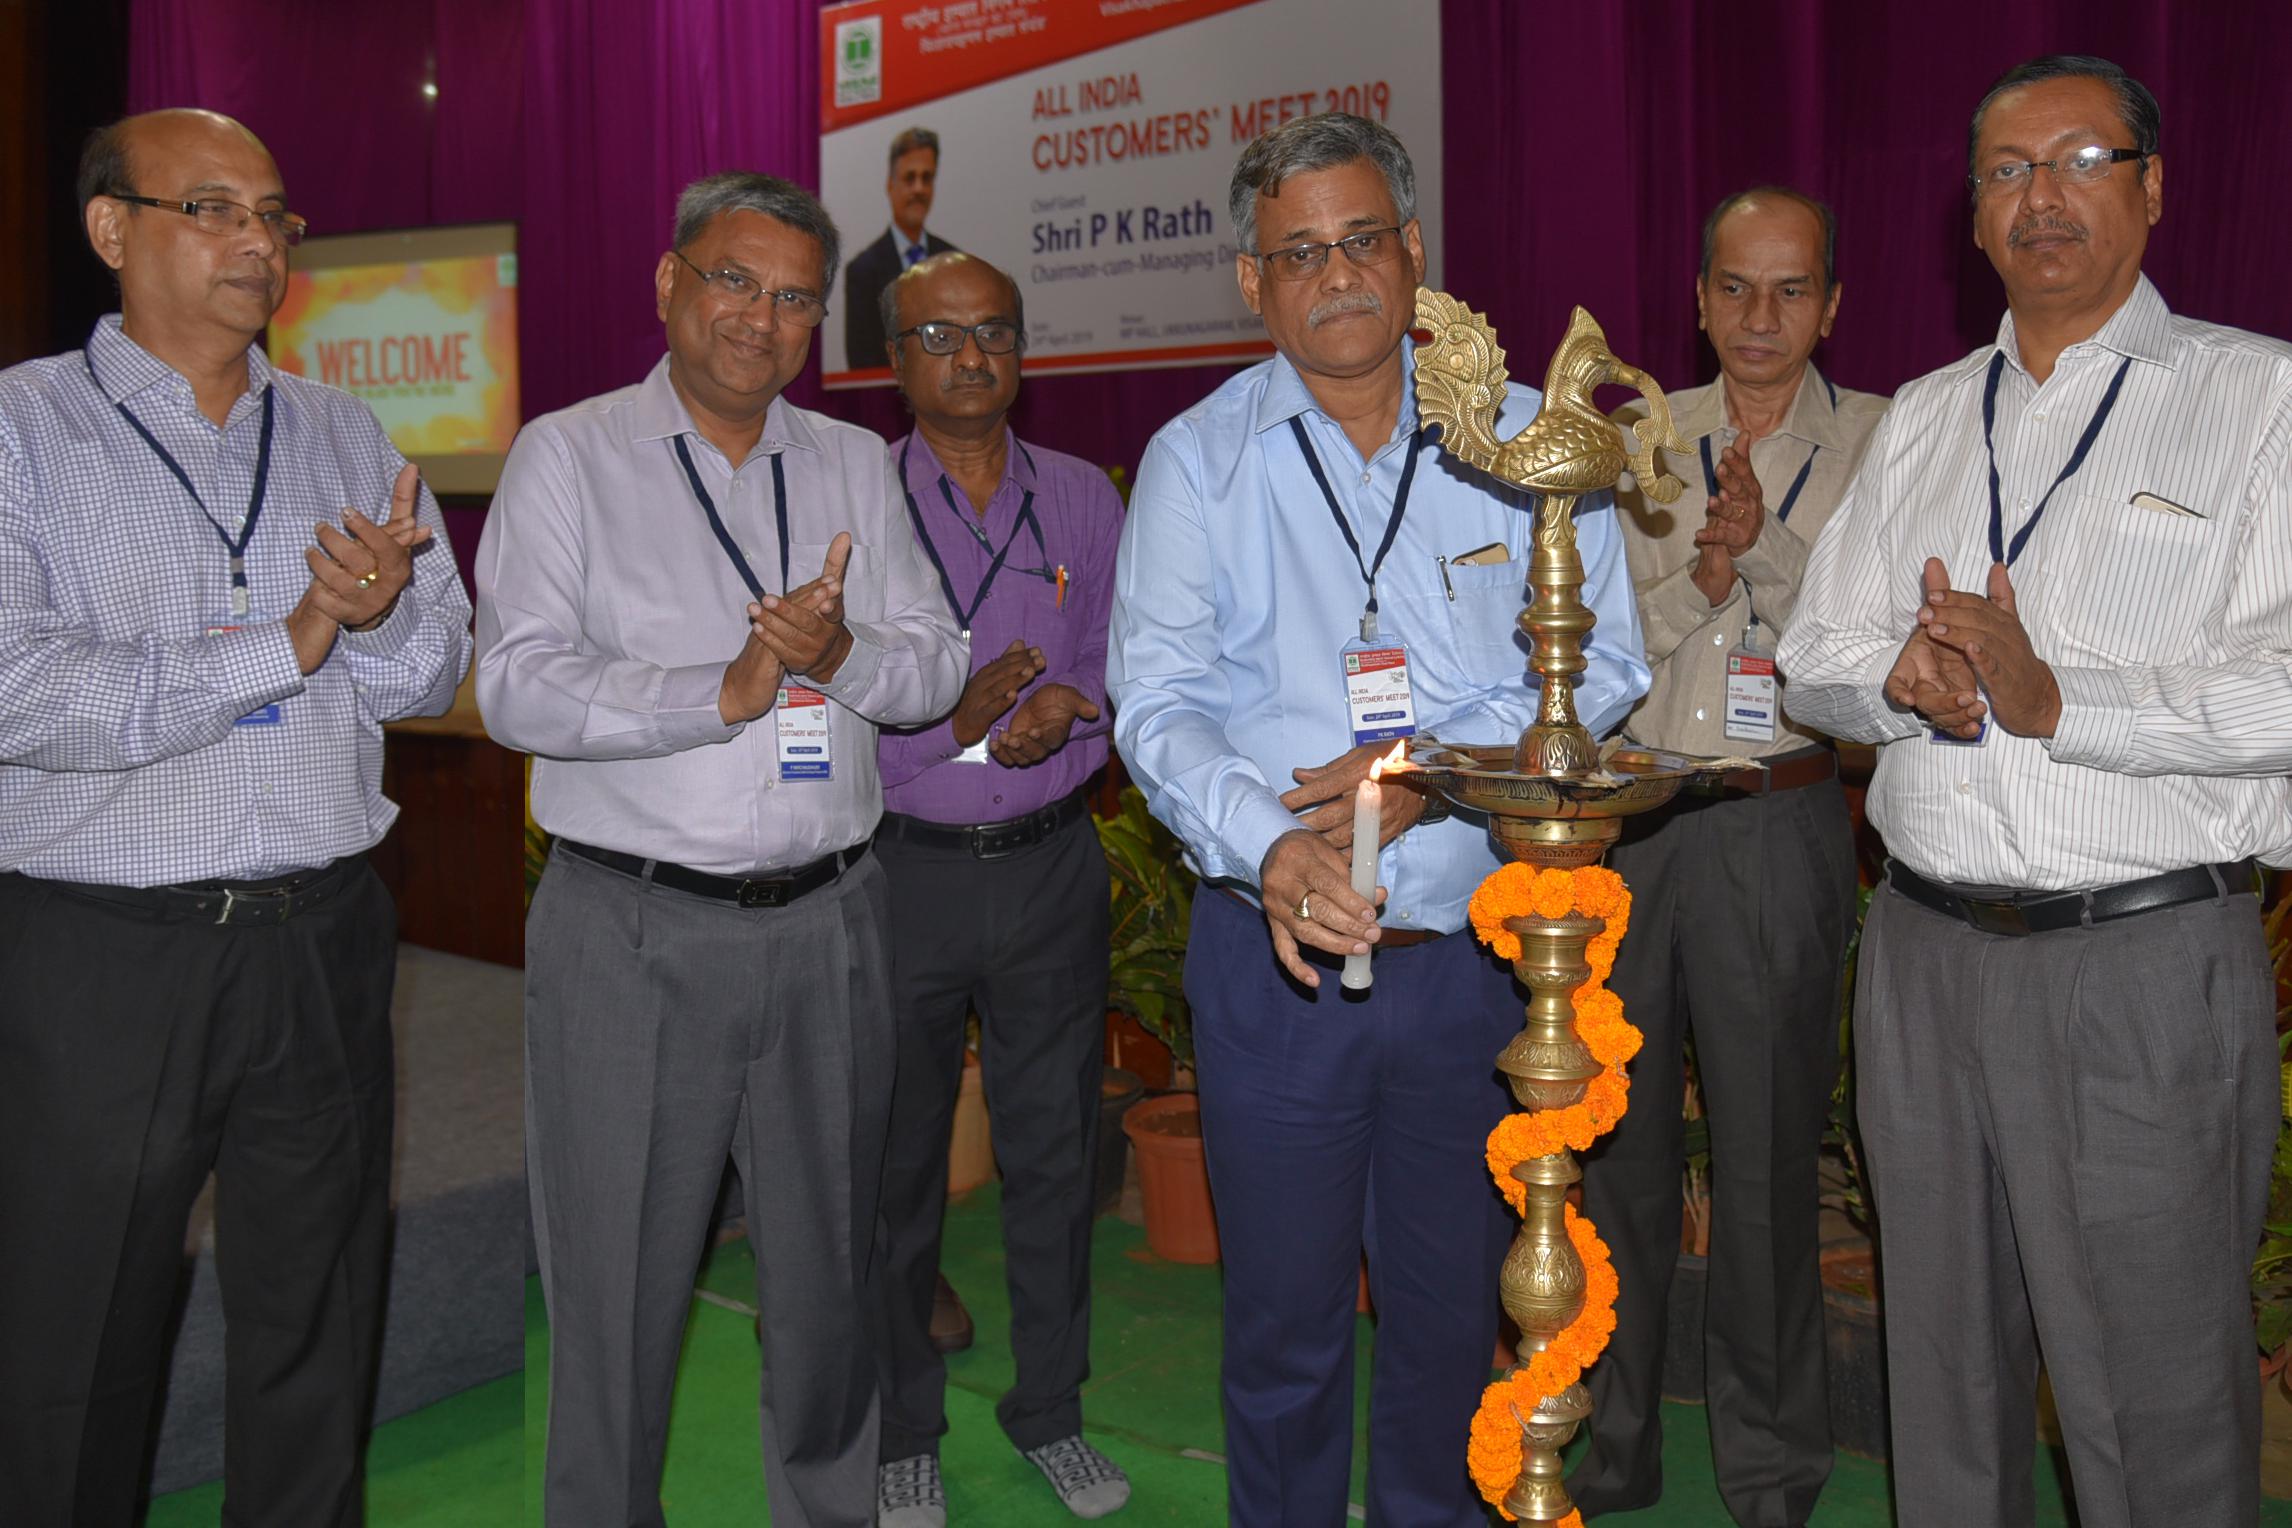 Customers are Partners in Success of RINL:  Sri PK Rath, CMD